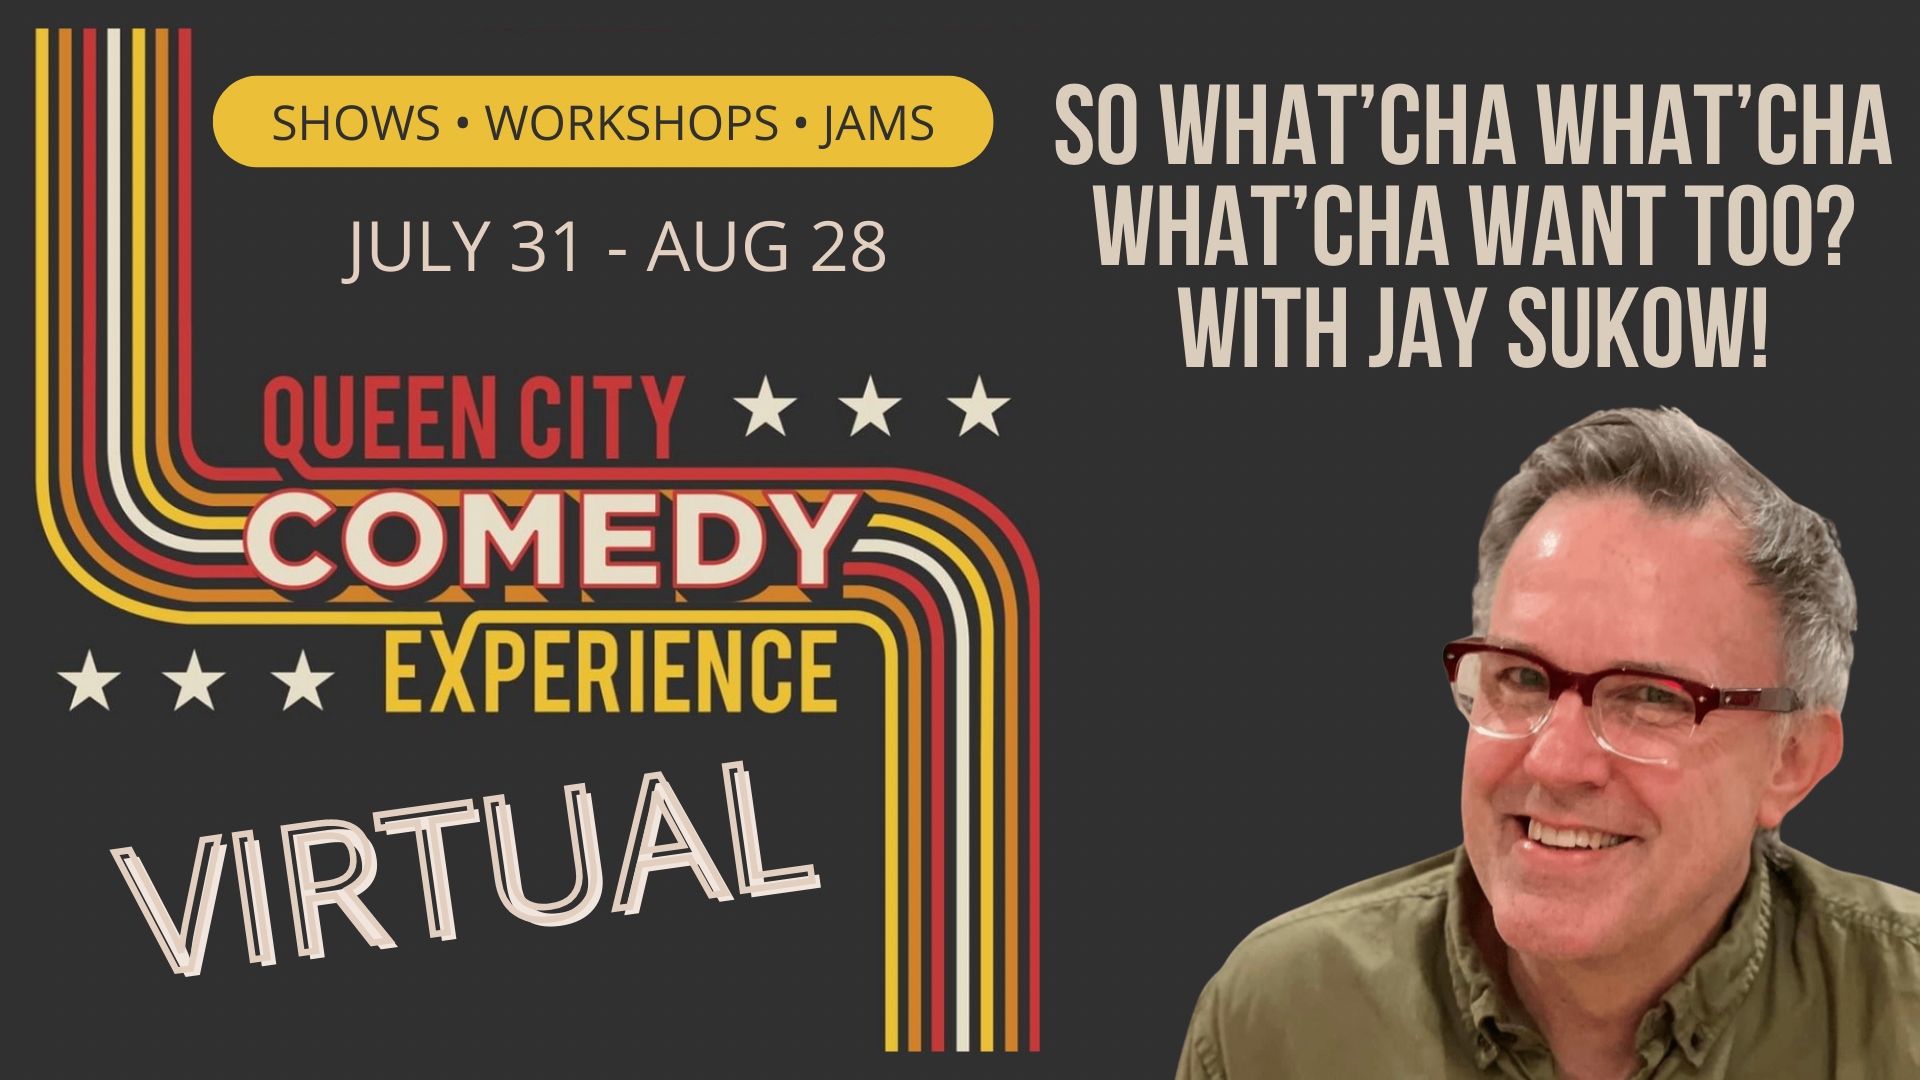 More Info for Virtual Fest Workshop - So What’cha What’cha What’cha Want Too? with Jay Sukow!